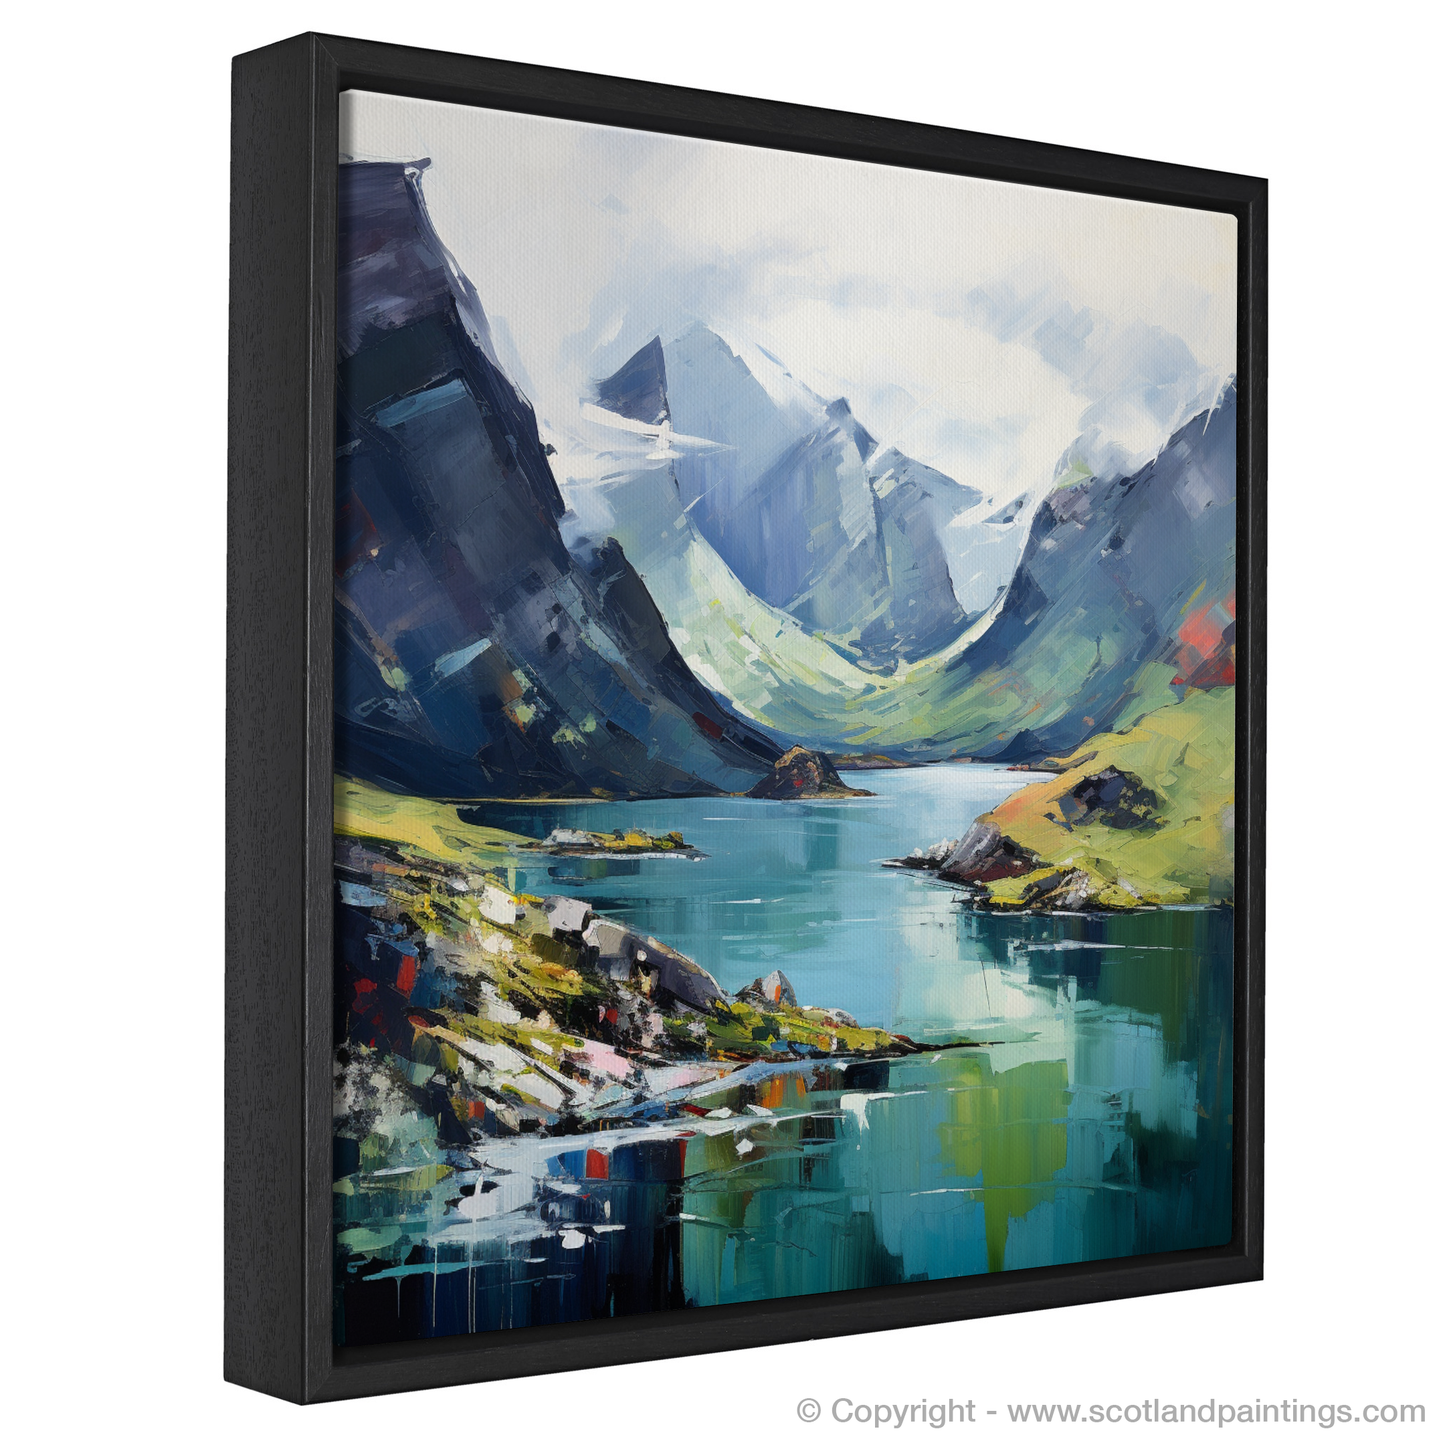 Painting and Art Print of Loch Coruisk, Isle of Skye entitled "Embrace of the Wild: Loch Coruisk Unleashed".